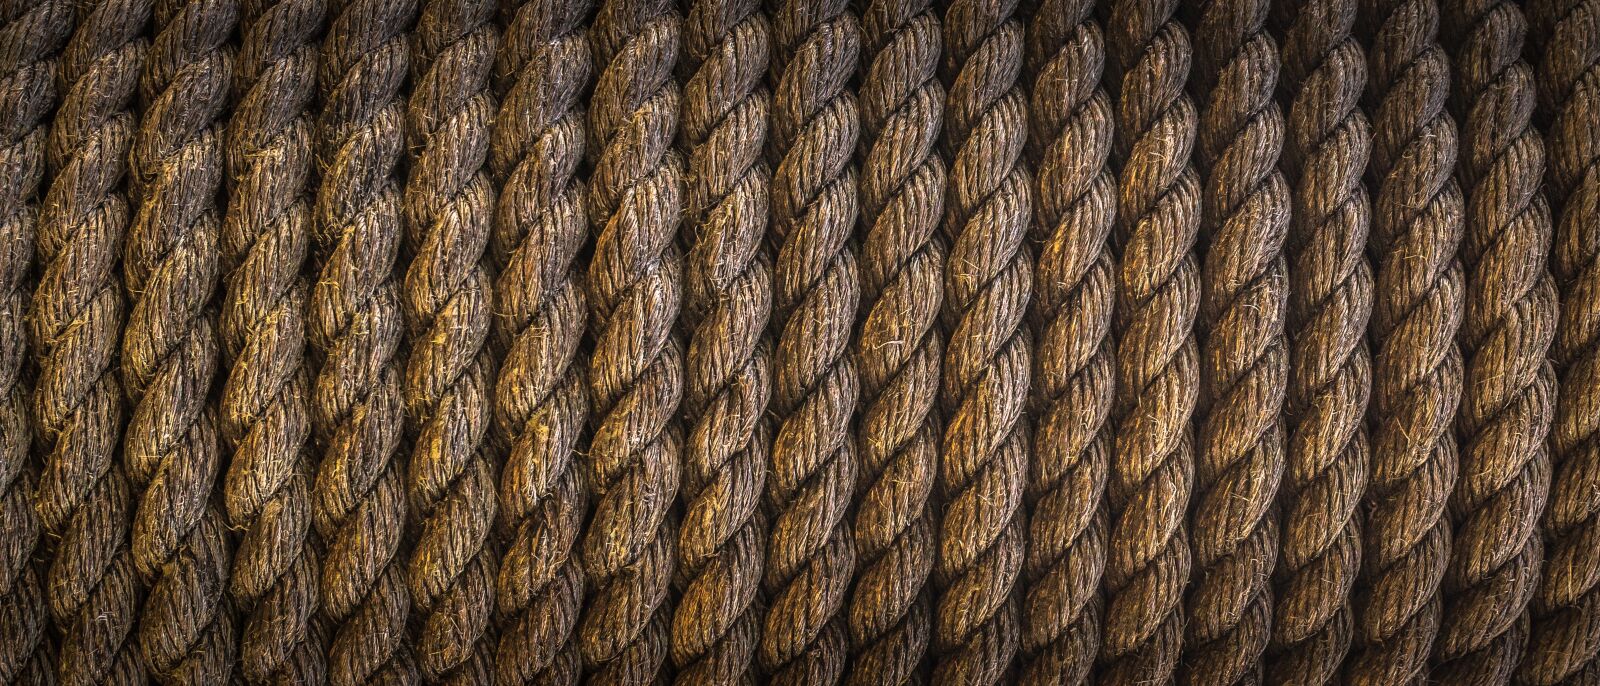 Sony Alpha NEX-5N sample photo. Tether, rope, knot photography